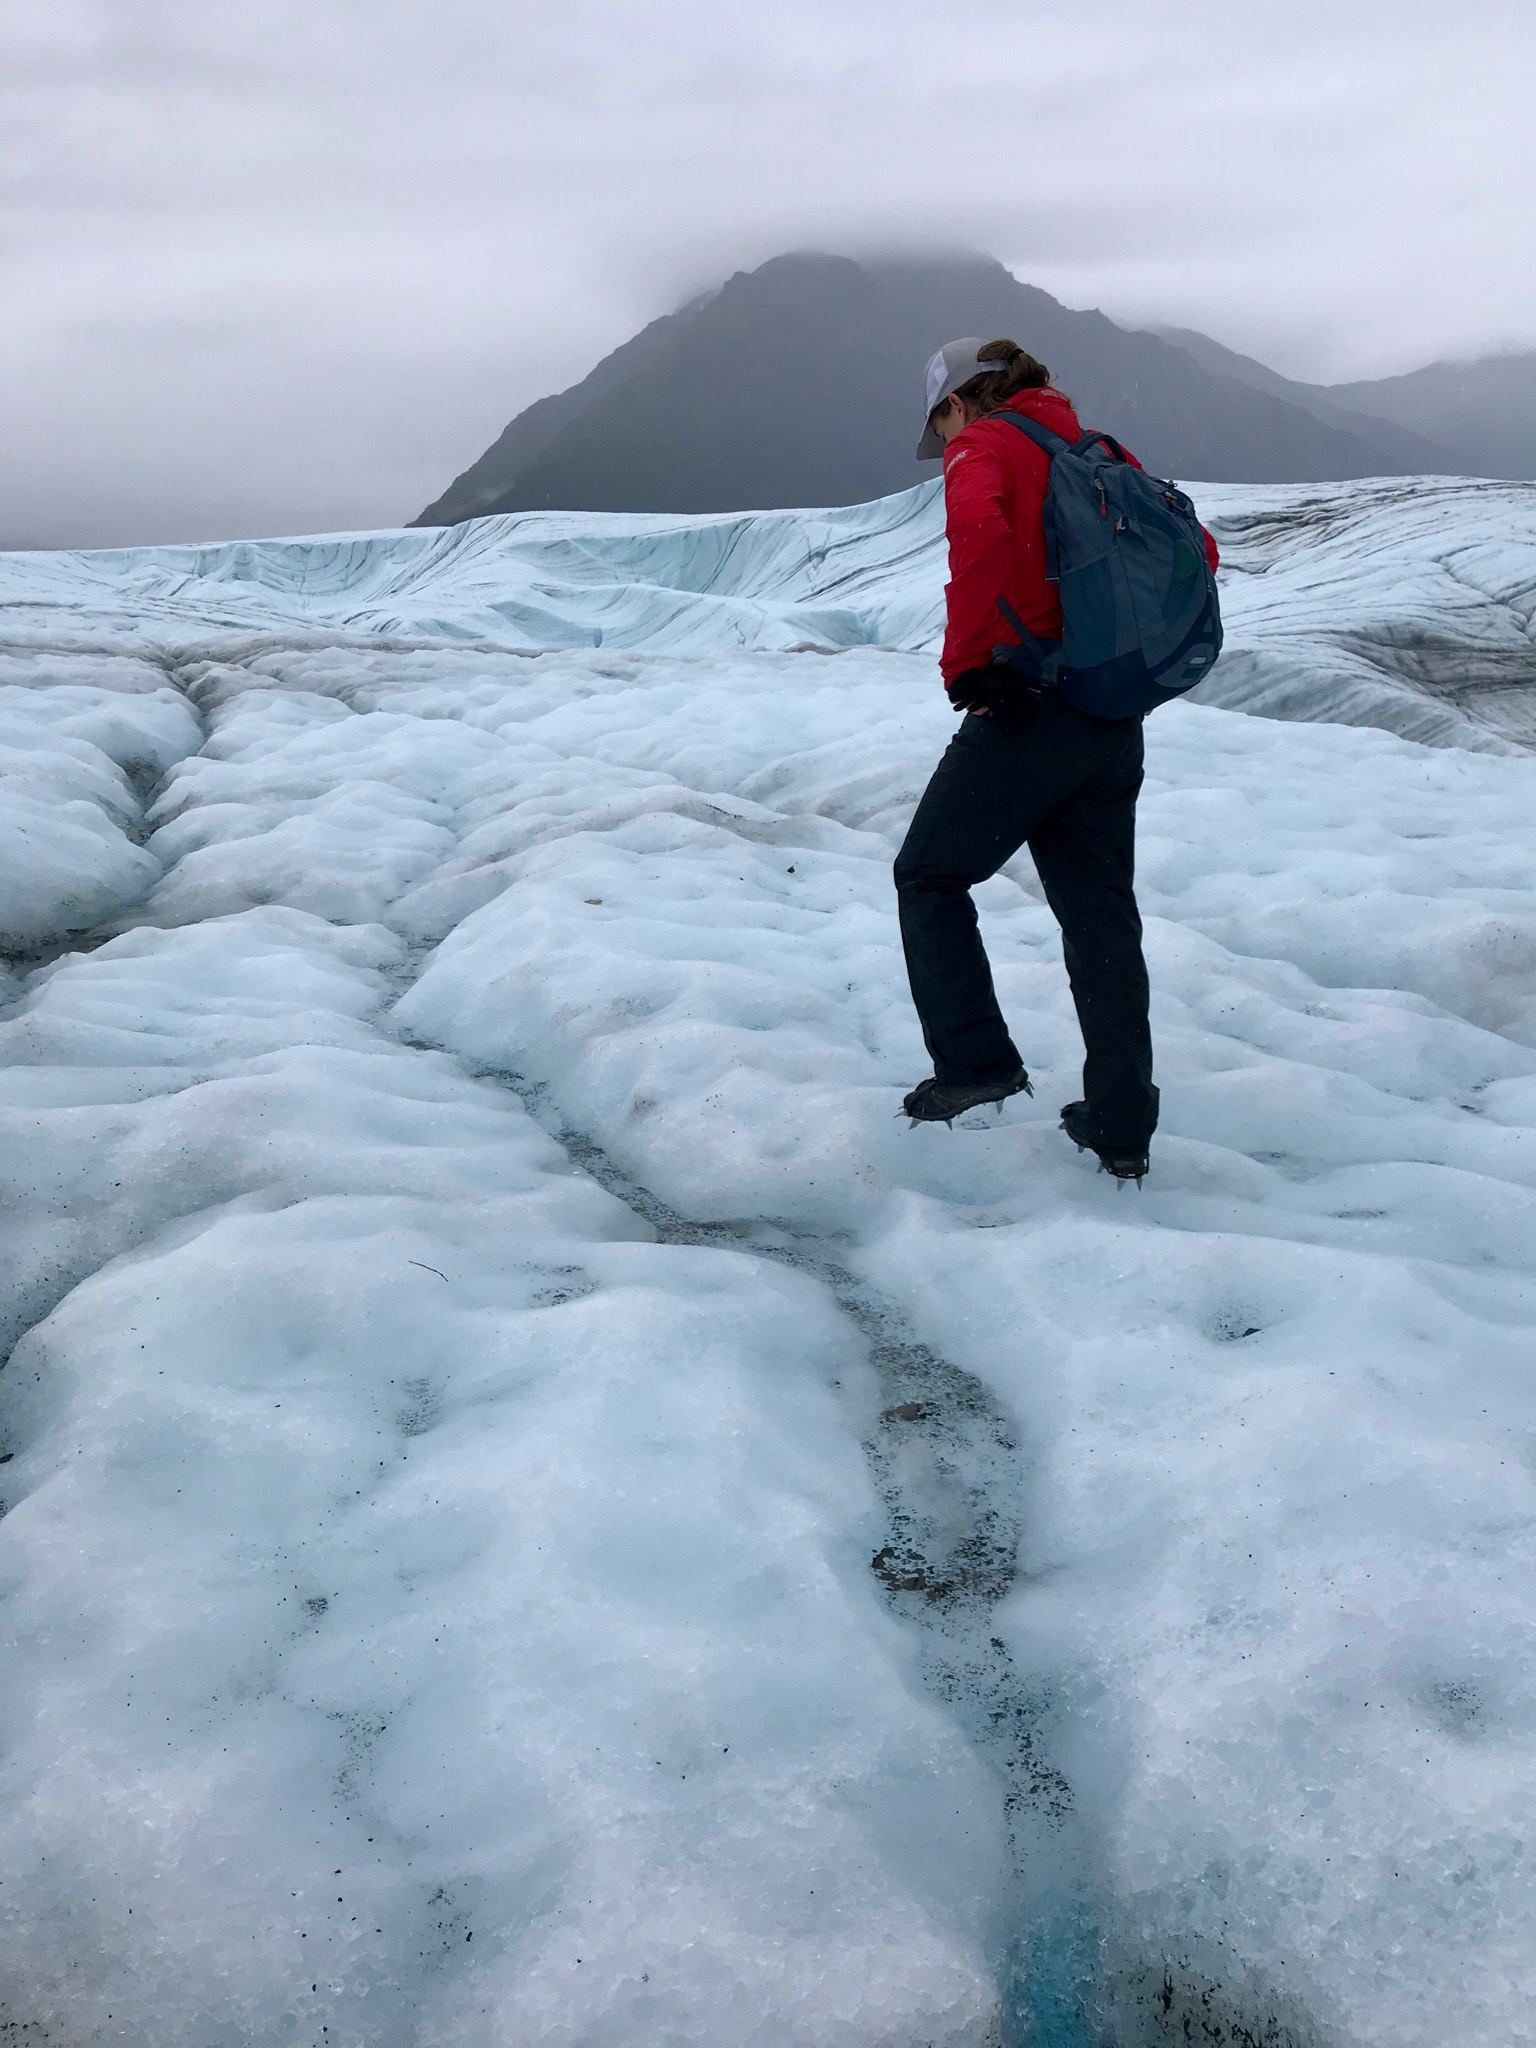 A woman wearing a red jacket, black pants, a backpack, and spiky shoes is seen from behind, walking along a glacier. There is ice surrounding her on the ground and a mountain in the distance. 